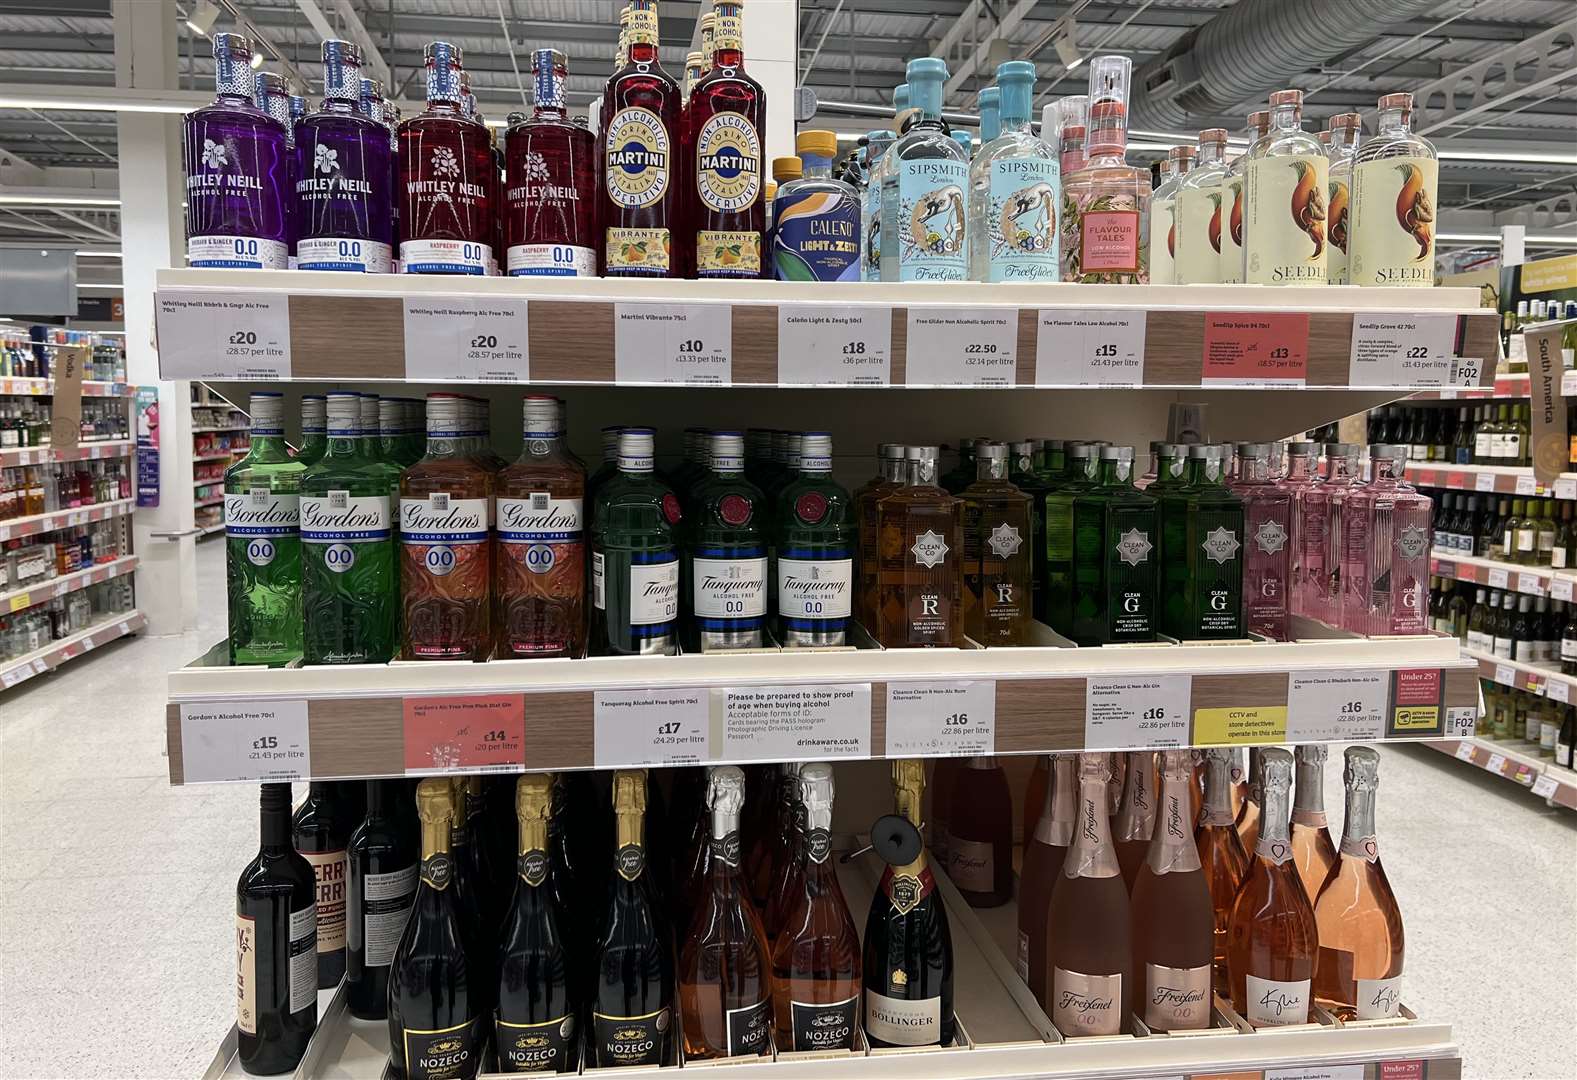 Non-alcoholic spirits are now big business - but not all local producers agree with the prices